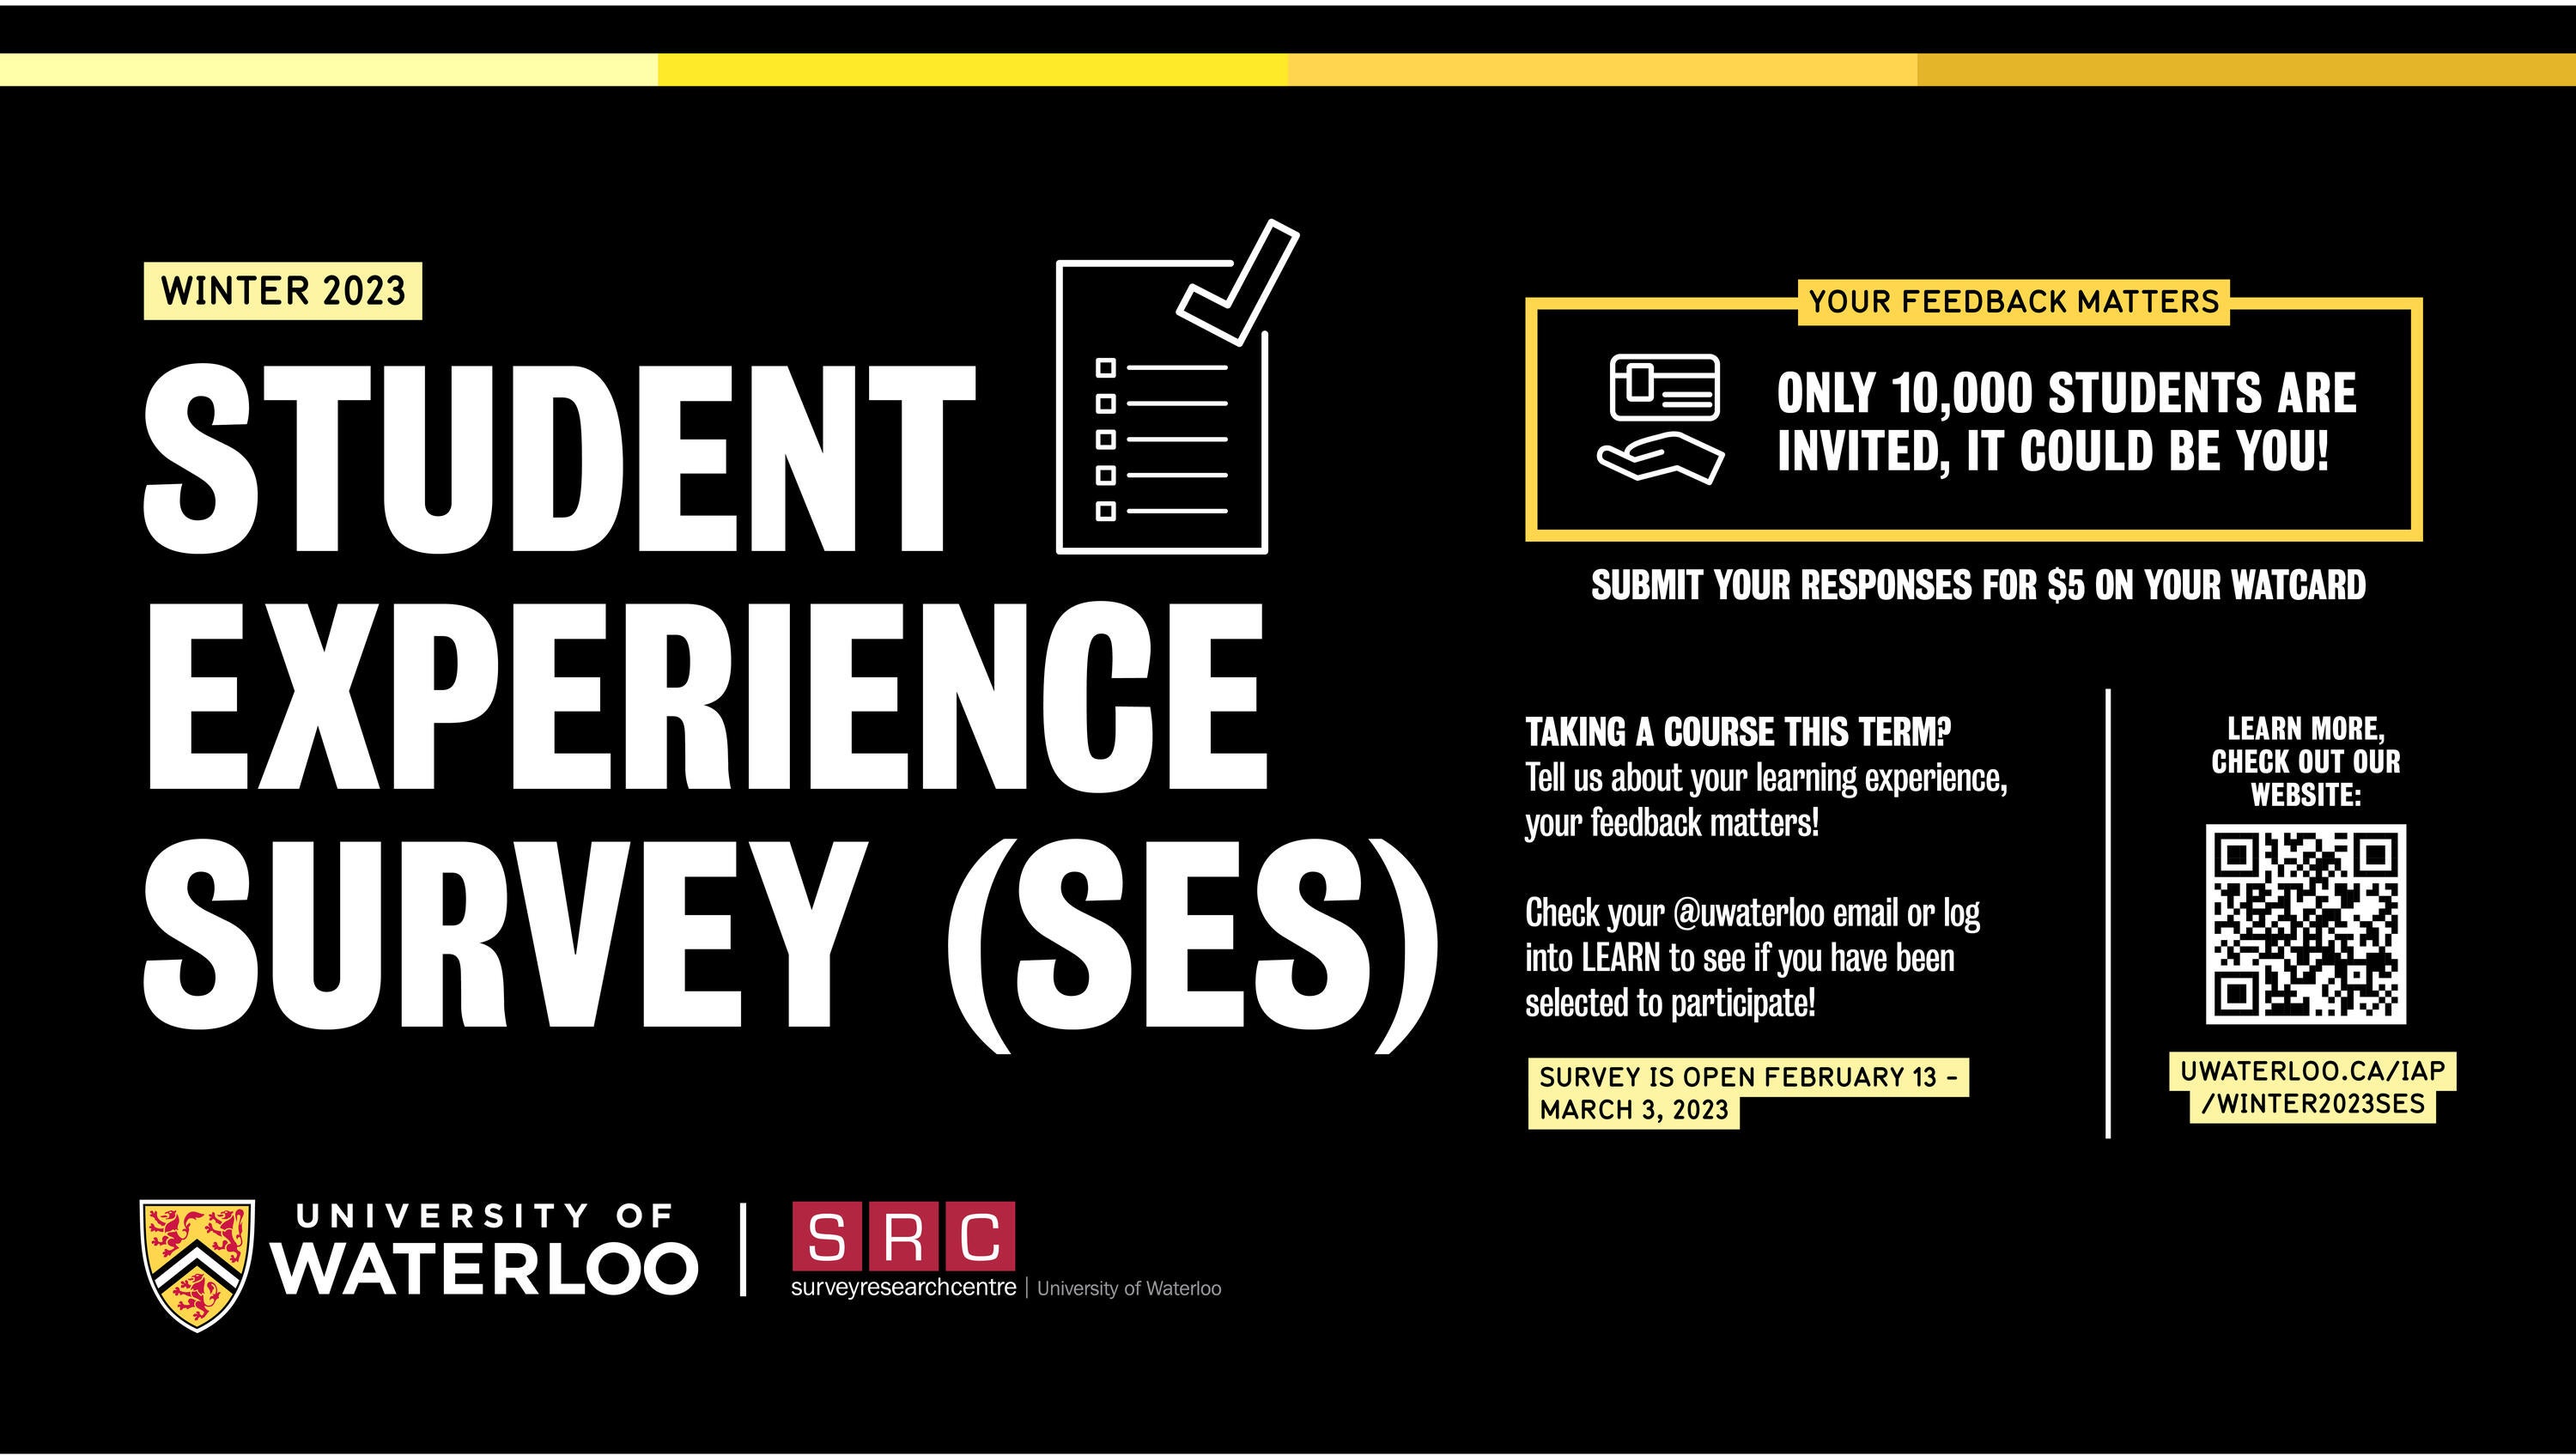 The Winter Student Experience Survey is open. The survey opens Feb 13. Submit your response for $5 on your WatCard. 